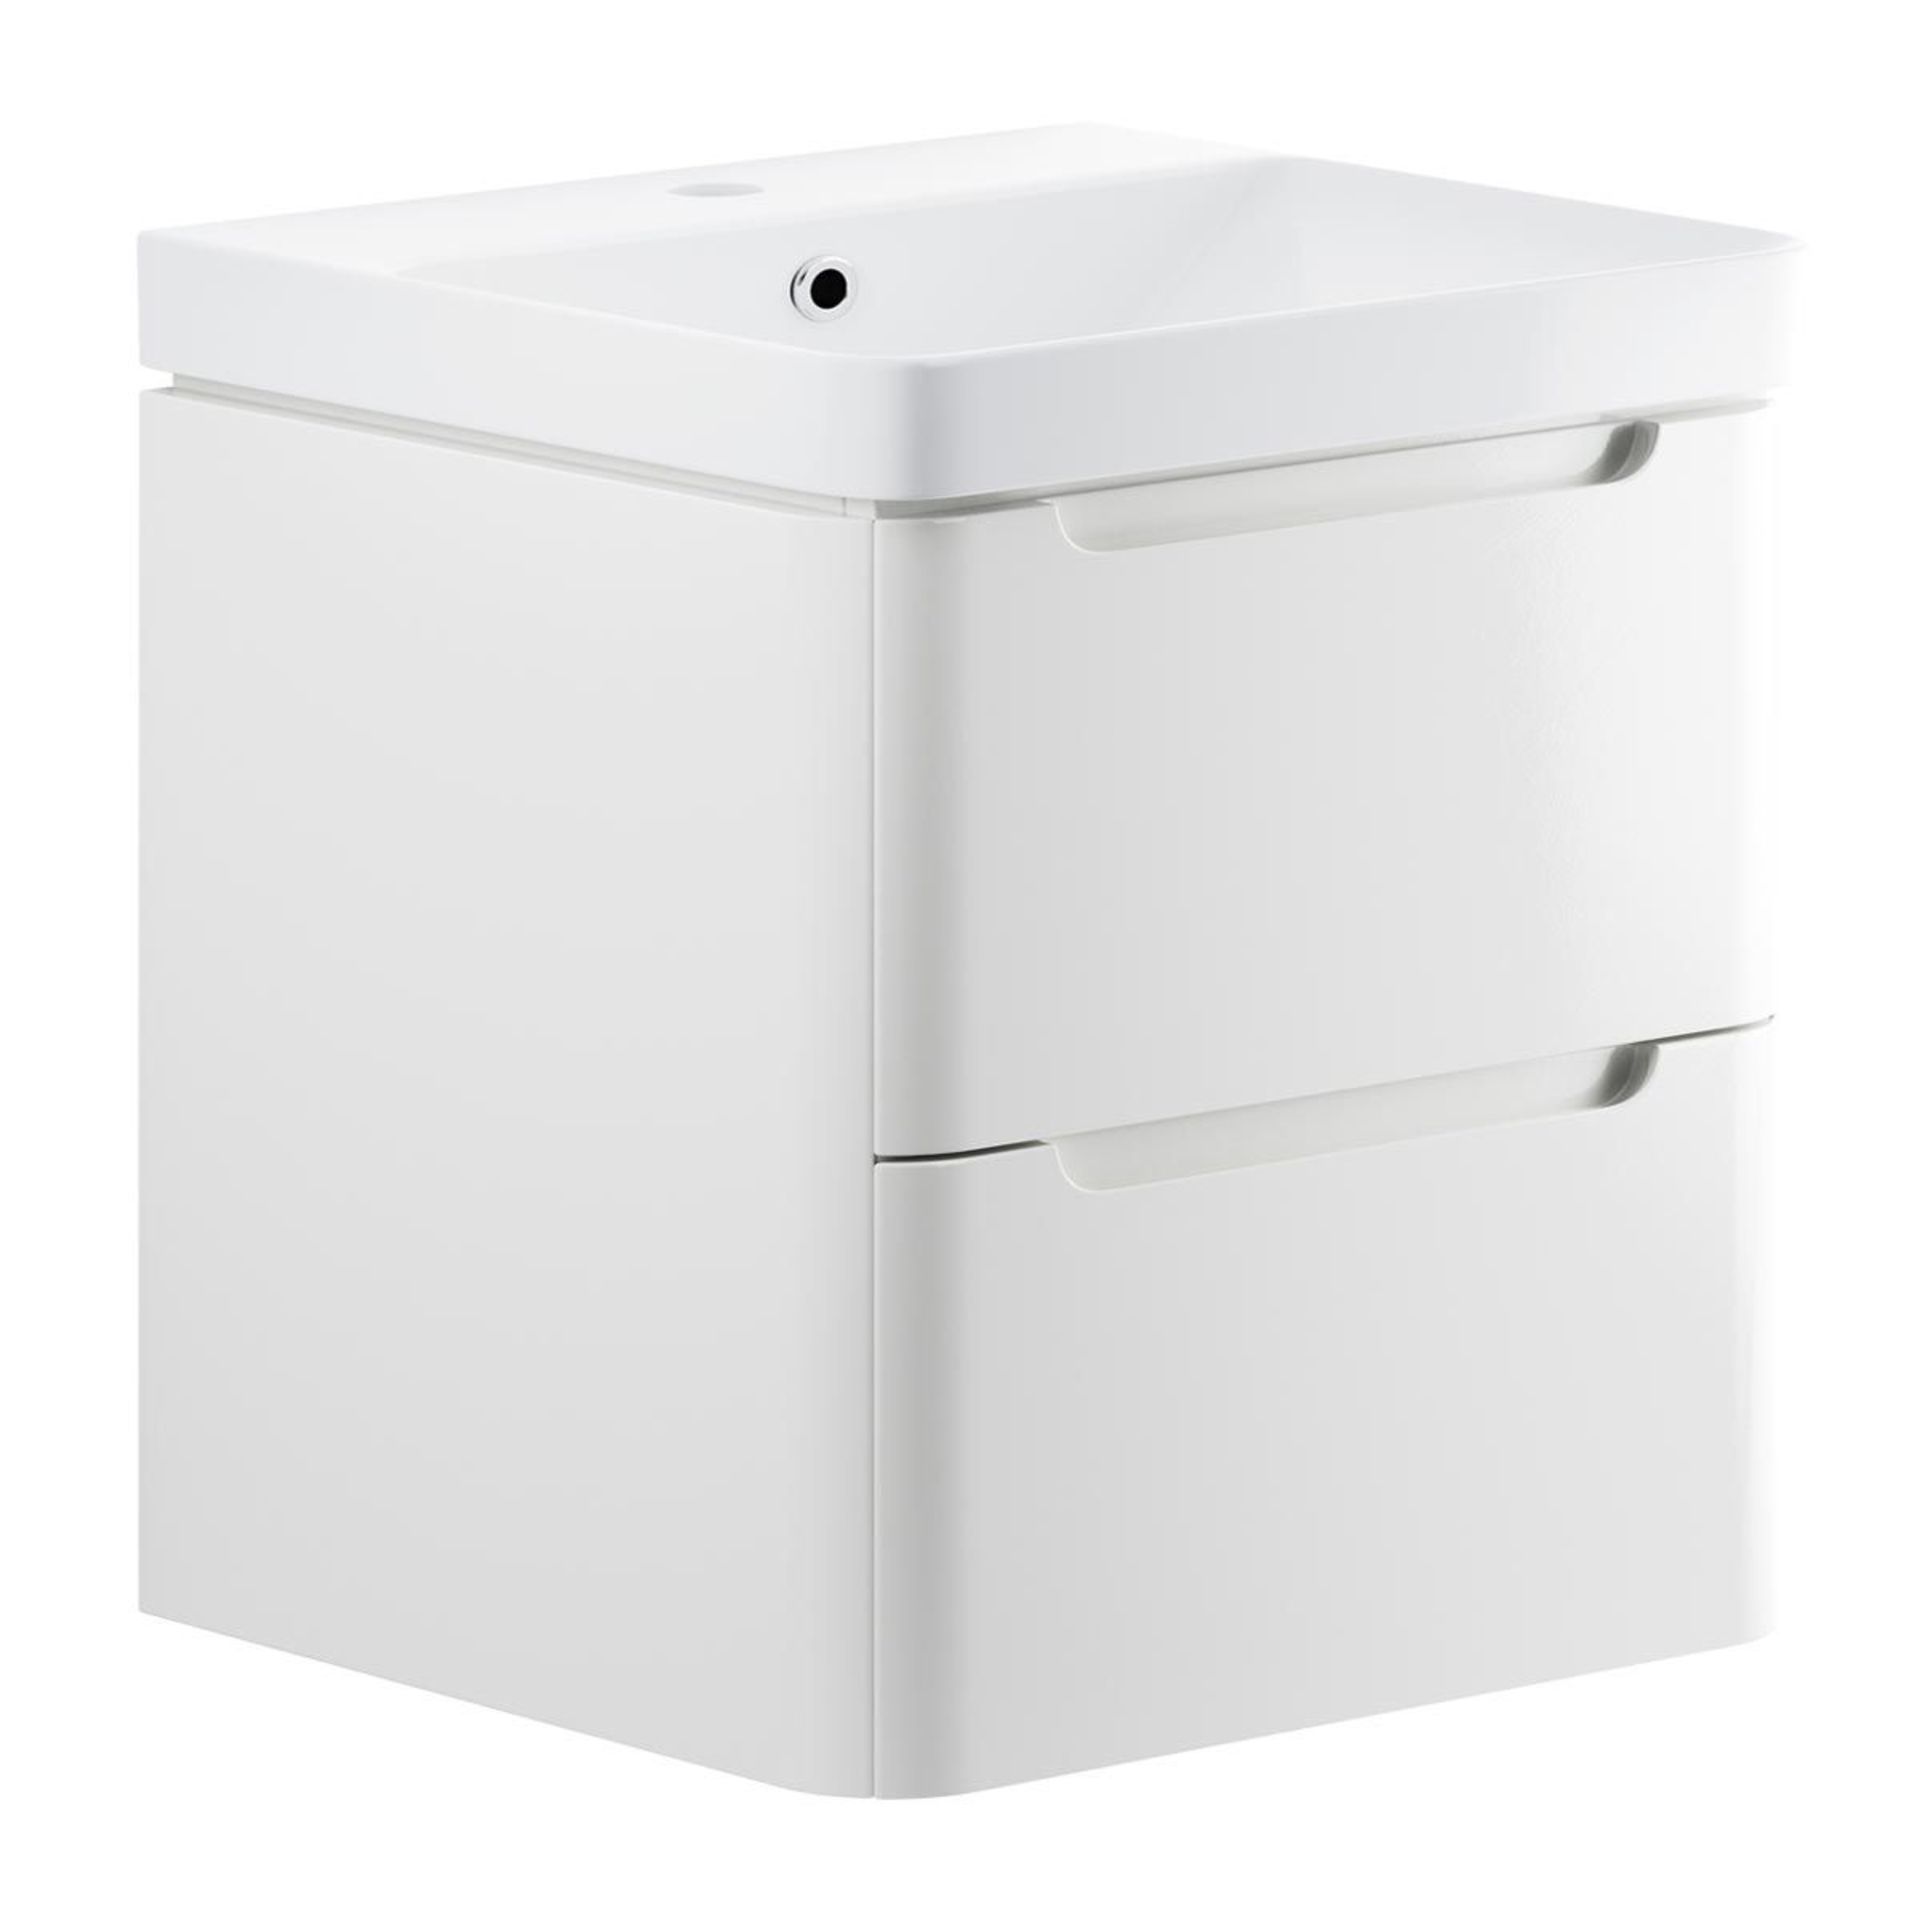 NEW AND BOXED 500MM Lambra Wall Hung Vanity Unit. RRP £402.98. WHITE GLOSS, BASIN INCLUDED. - Image 2 of 2